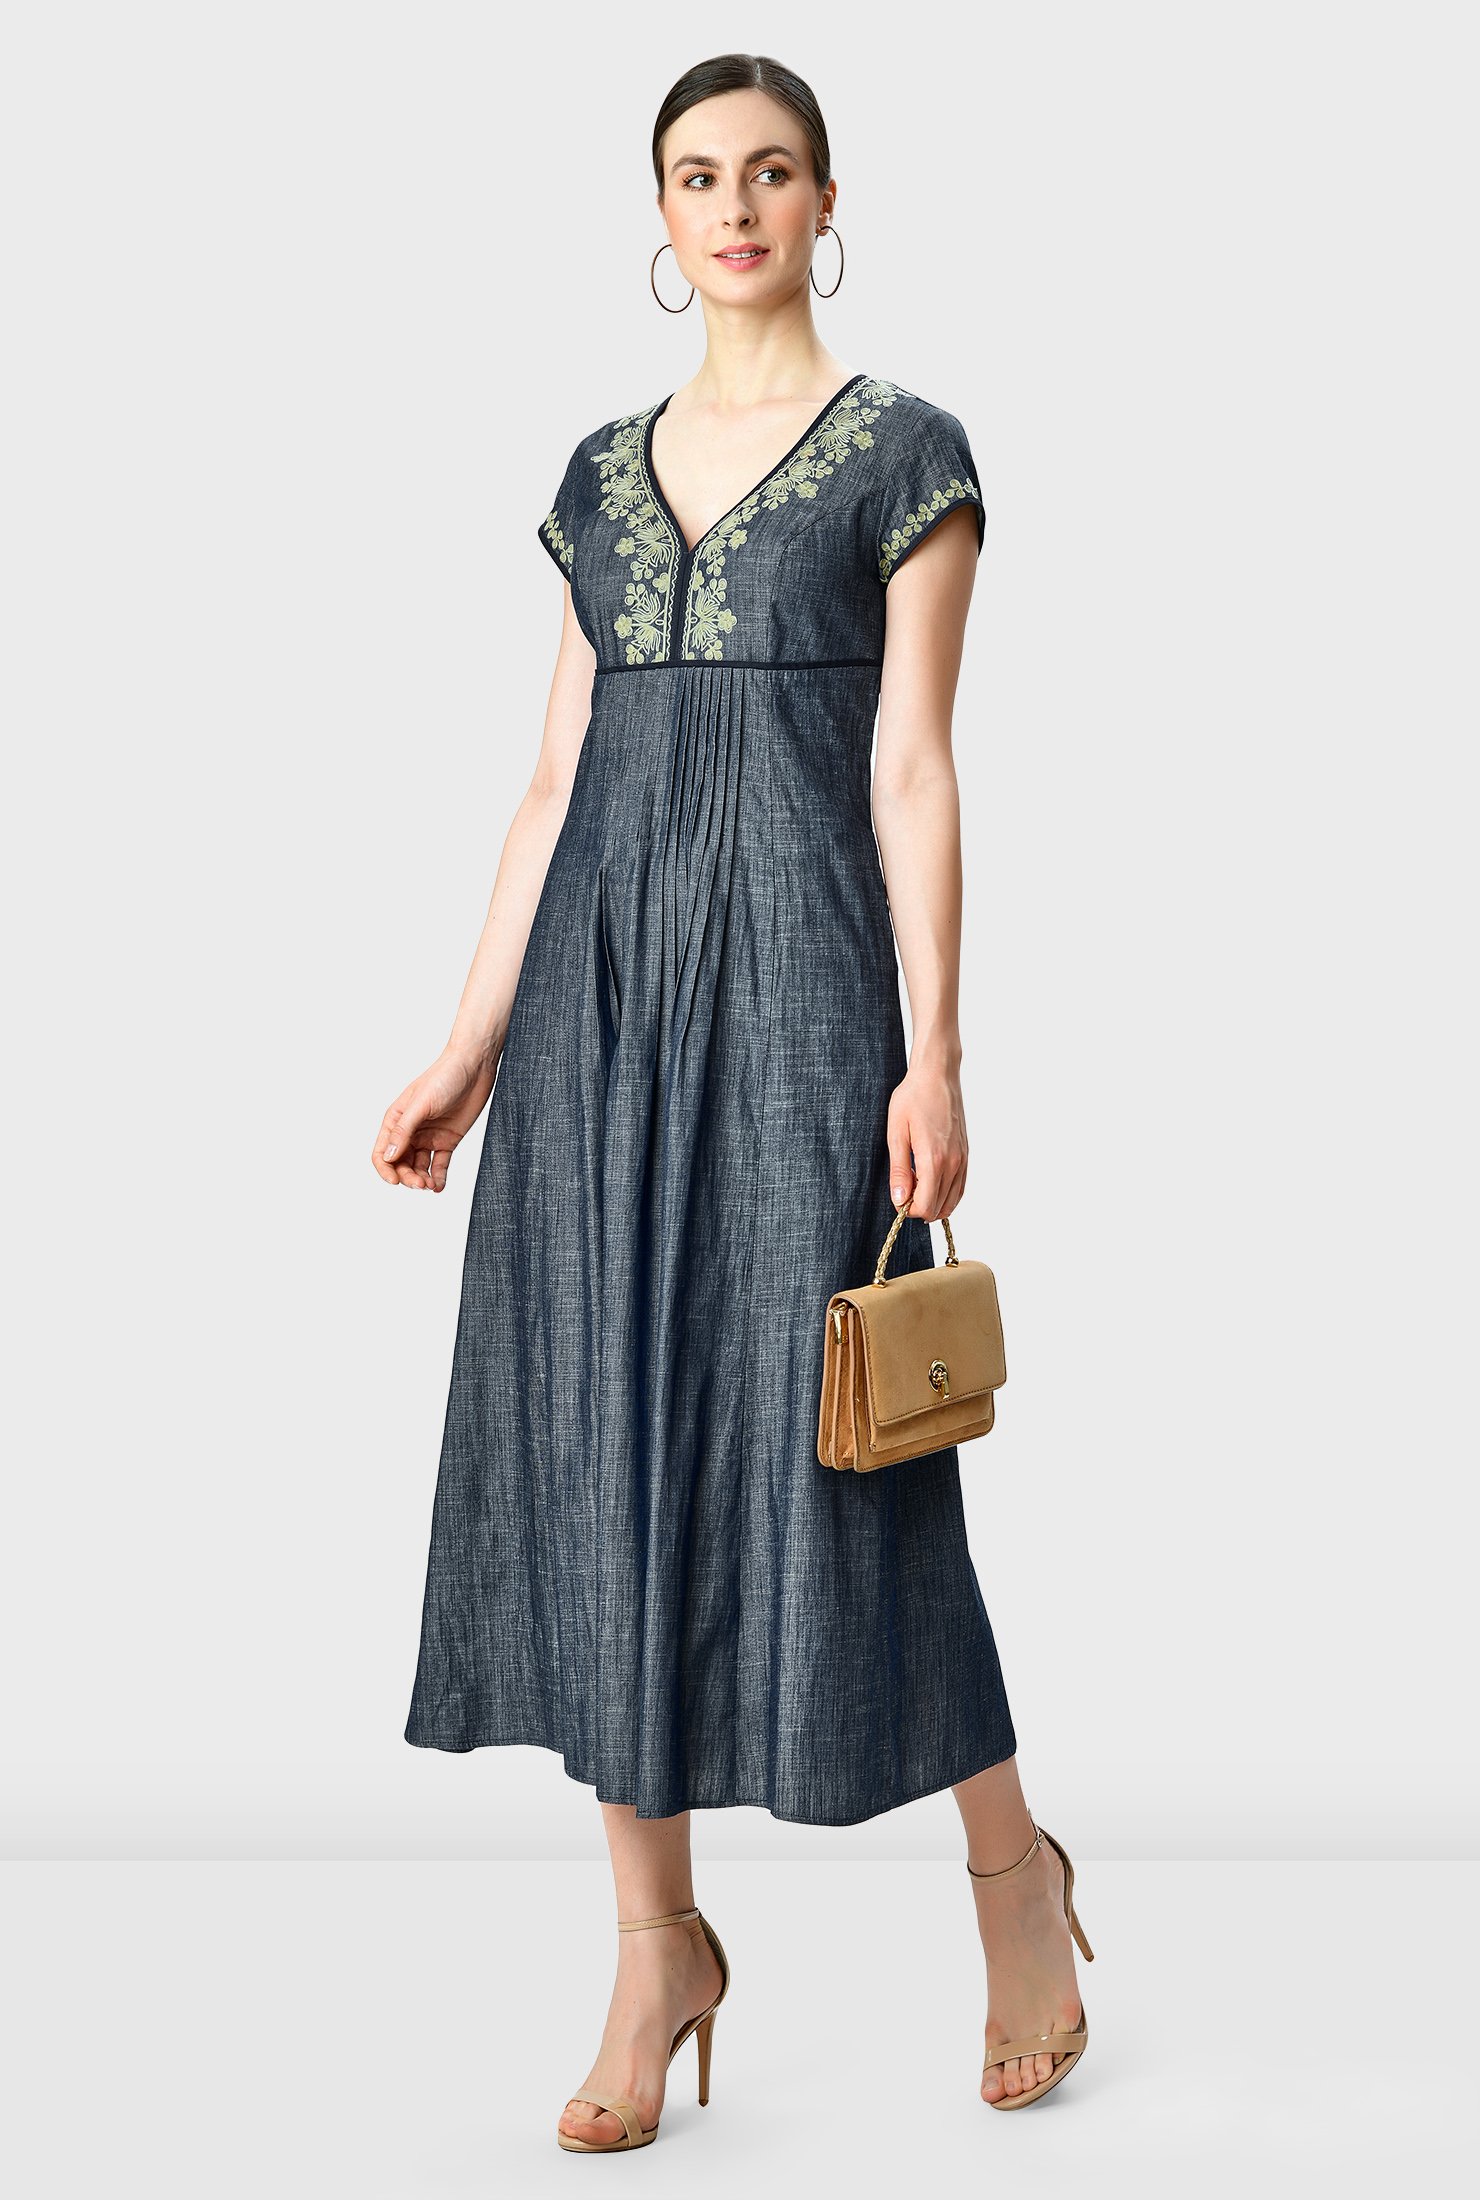 Artful embroidery blooms on our light cotton chambray dress fashioned with front and back pintuck pleats that release from the contrast empire waist to the full flare skirt. 